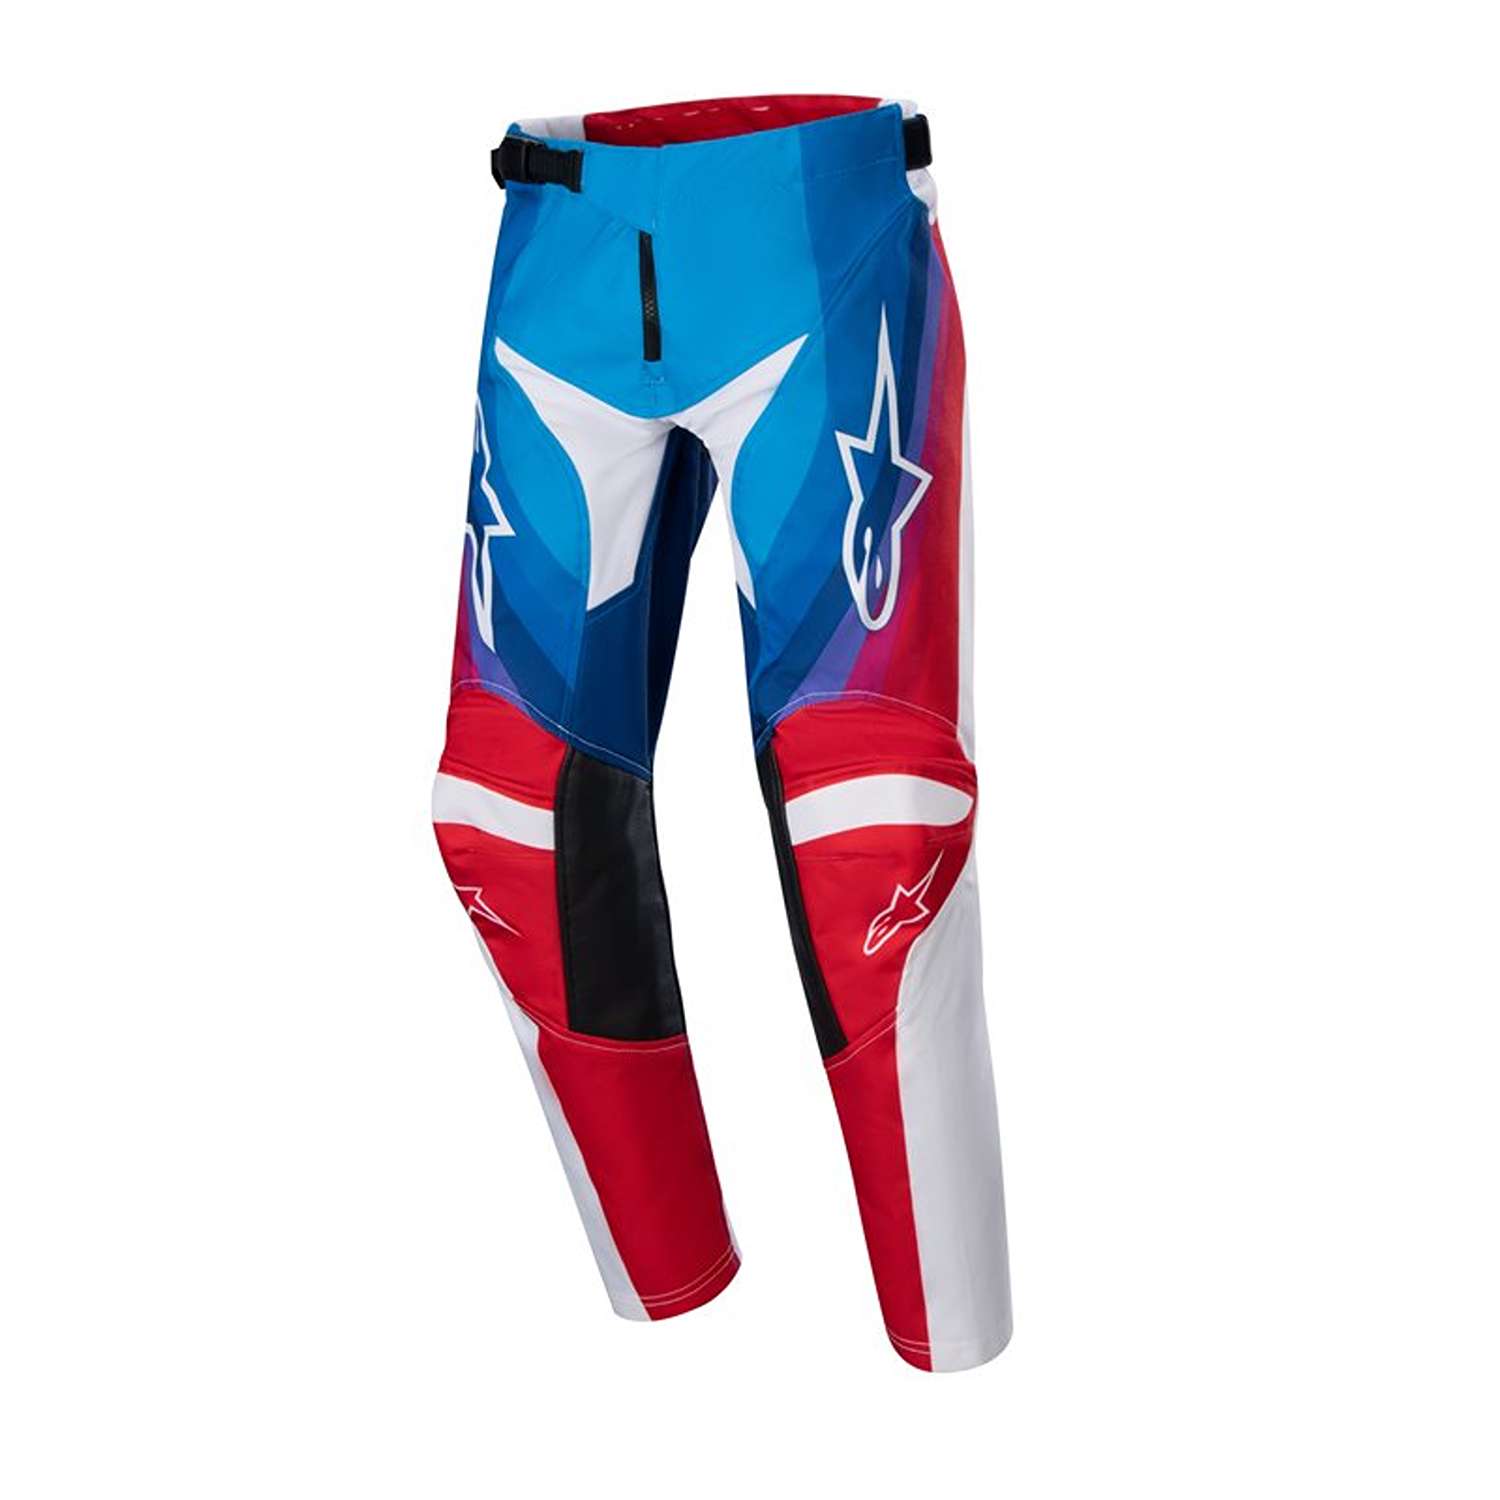 Image of EU Alpinestars Youth Racer Pneuma Pants Blue Mars Red White Taille 24